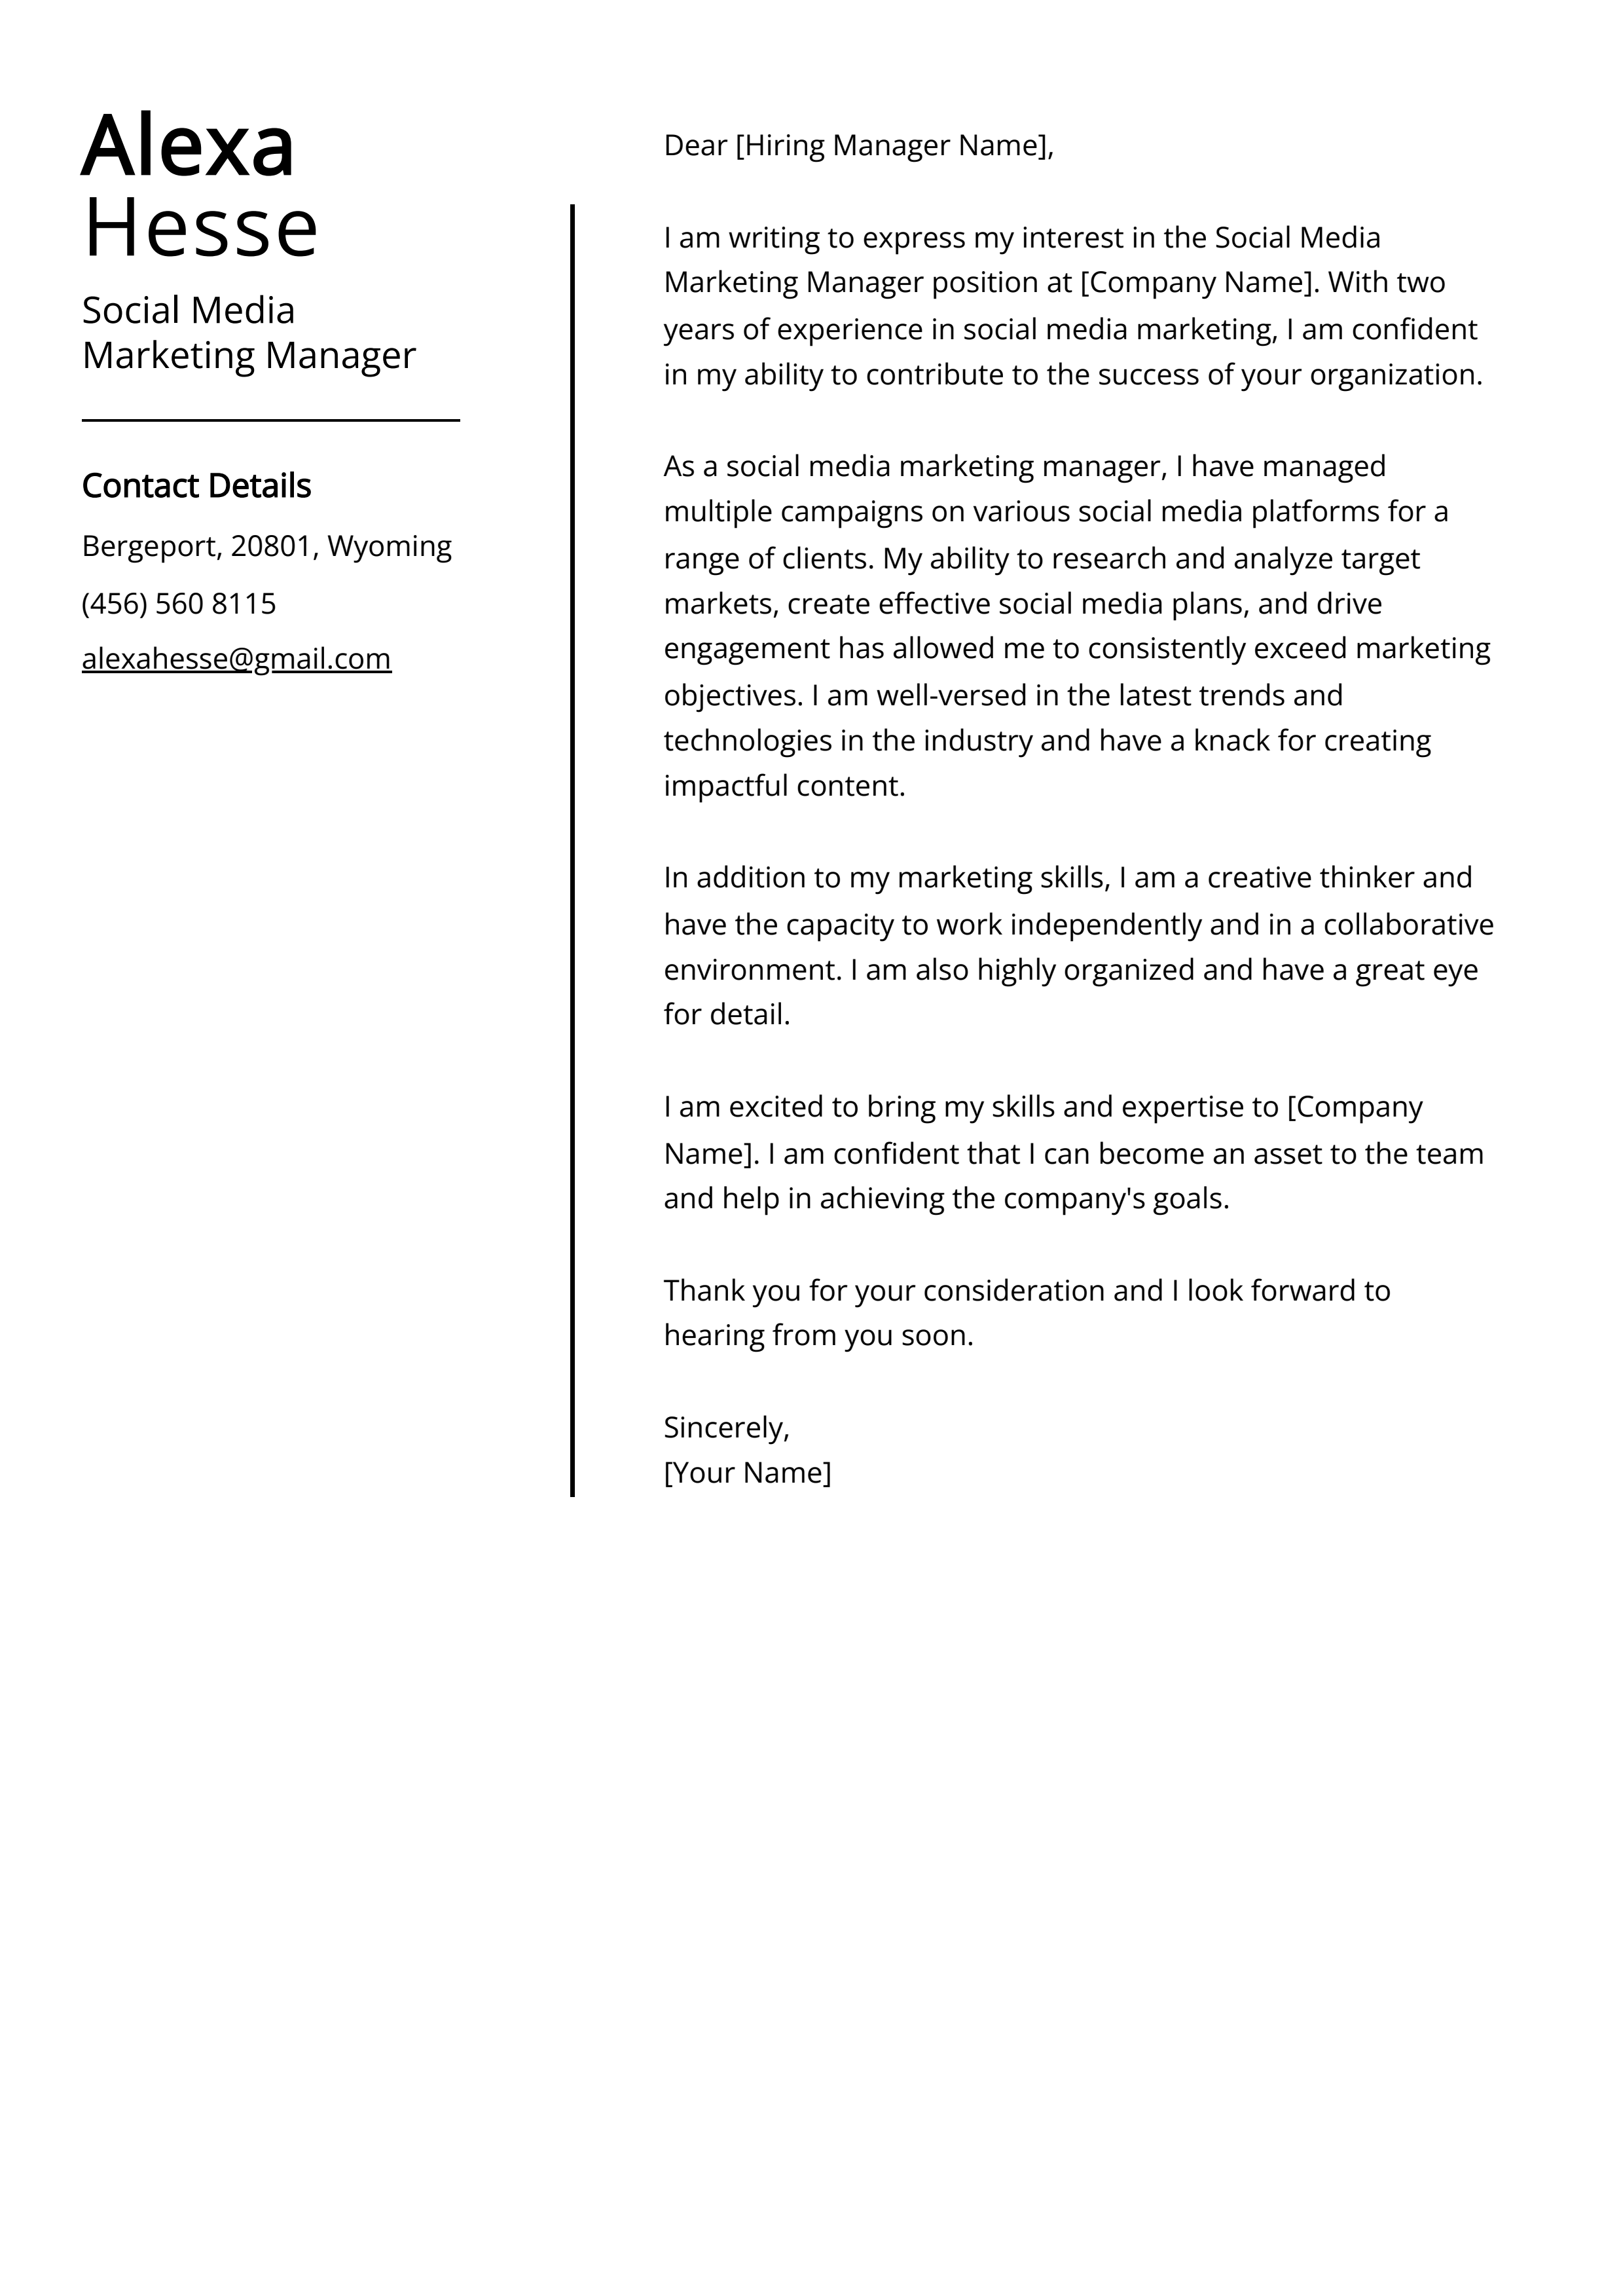 Social Media Marketing Manager Cover Letter Example